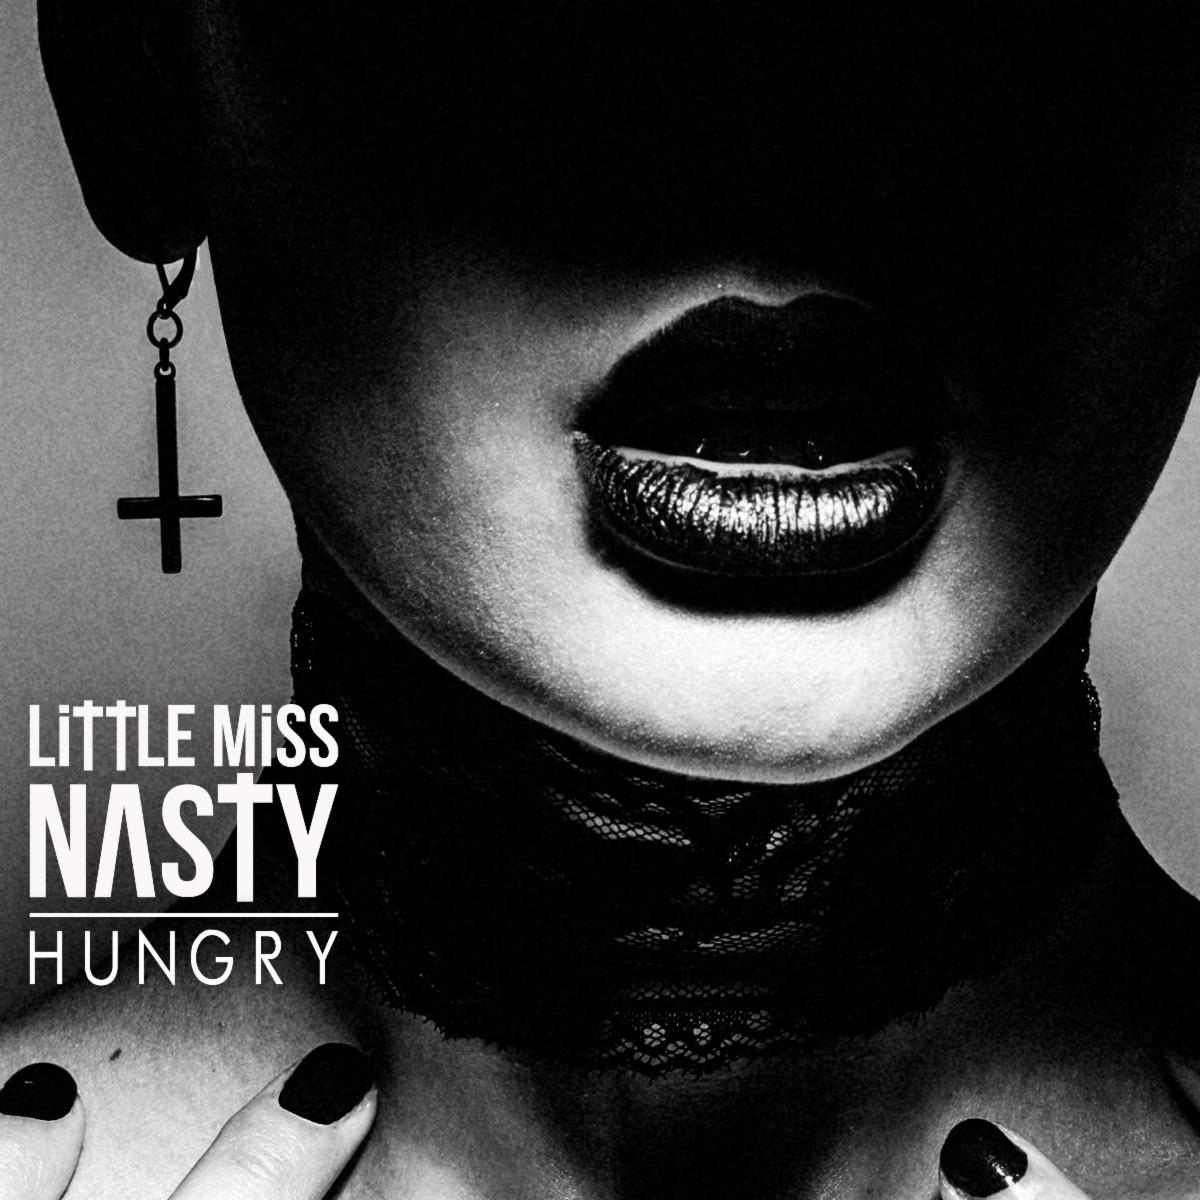 Rock-n-Roll Dance Troupe LITTLE MISS NASTY Unleash New Track "Hungry"